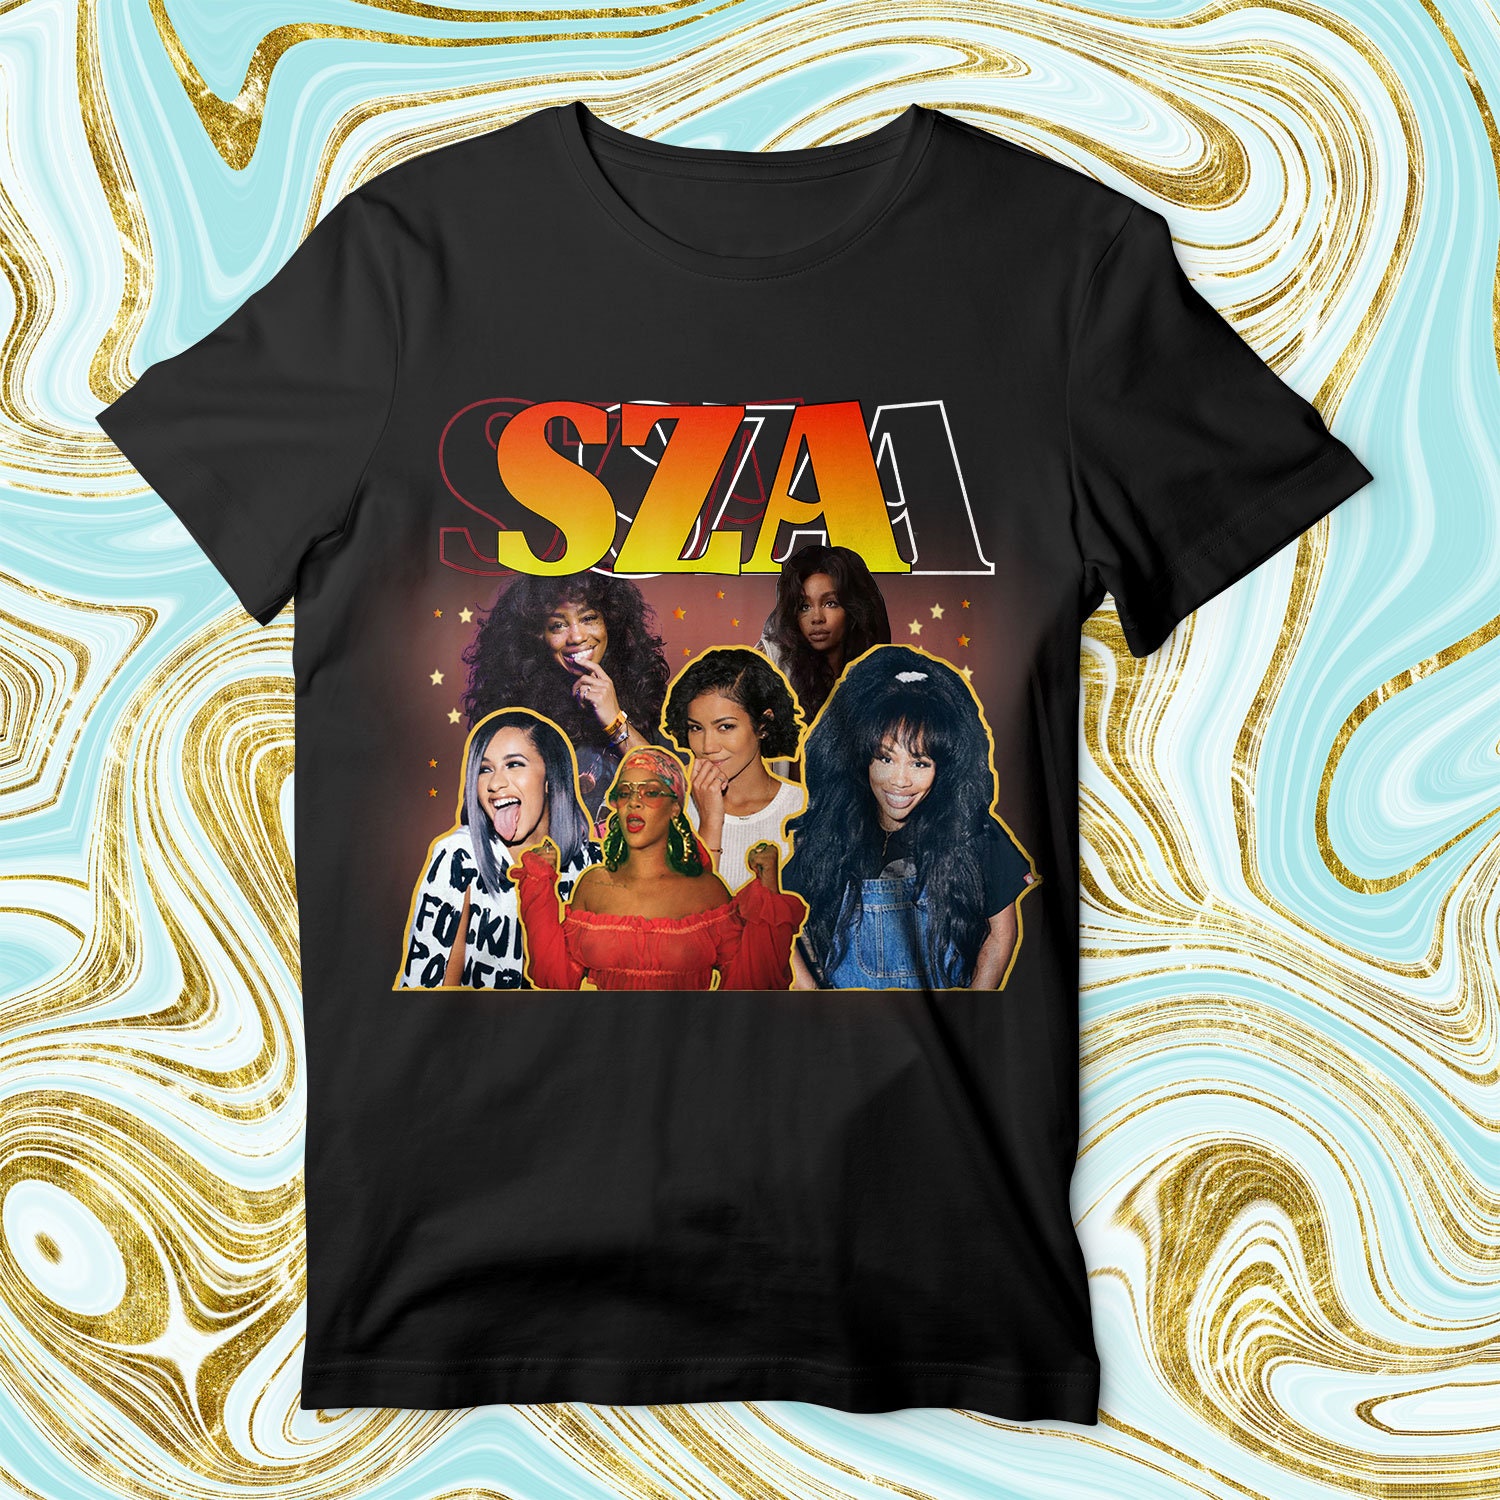 Discover SZA Vintage T-Shirt, Any Color T-Shirt